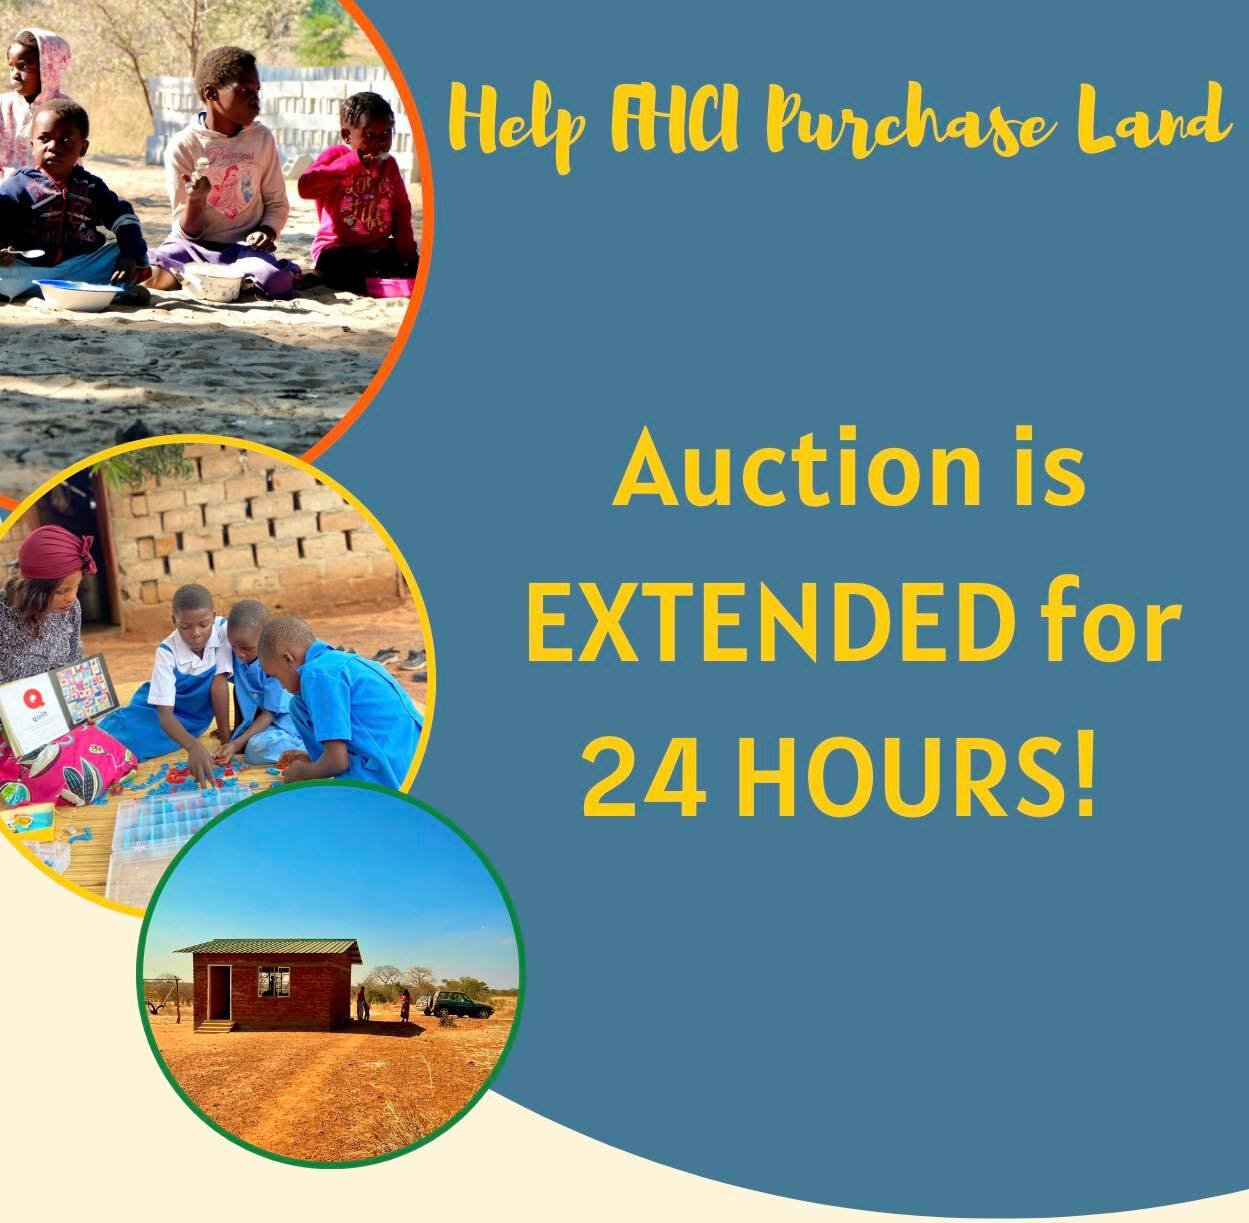 We are EXTENDING the AUCTION for 24 hours!! 

You have 24 hours to make any last minute bids before it ends TOMORROW �
Check out our Global Online Auction: https://fhci.betterworld.org/auctions/help-fhci-purchase-land 

Support our &ldquo;Help FHCI P